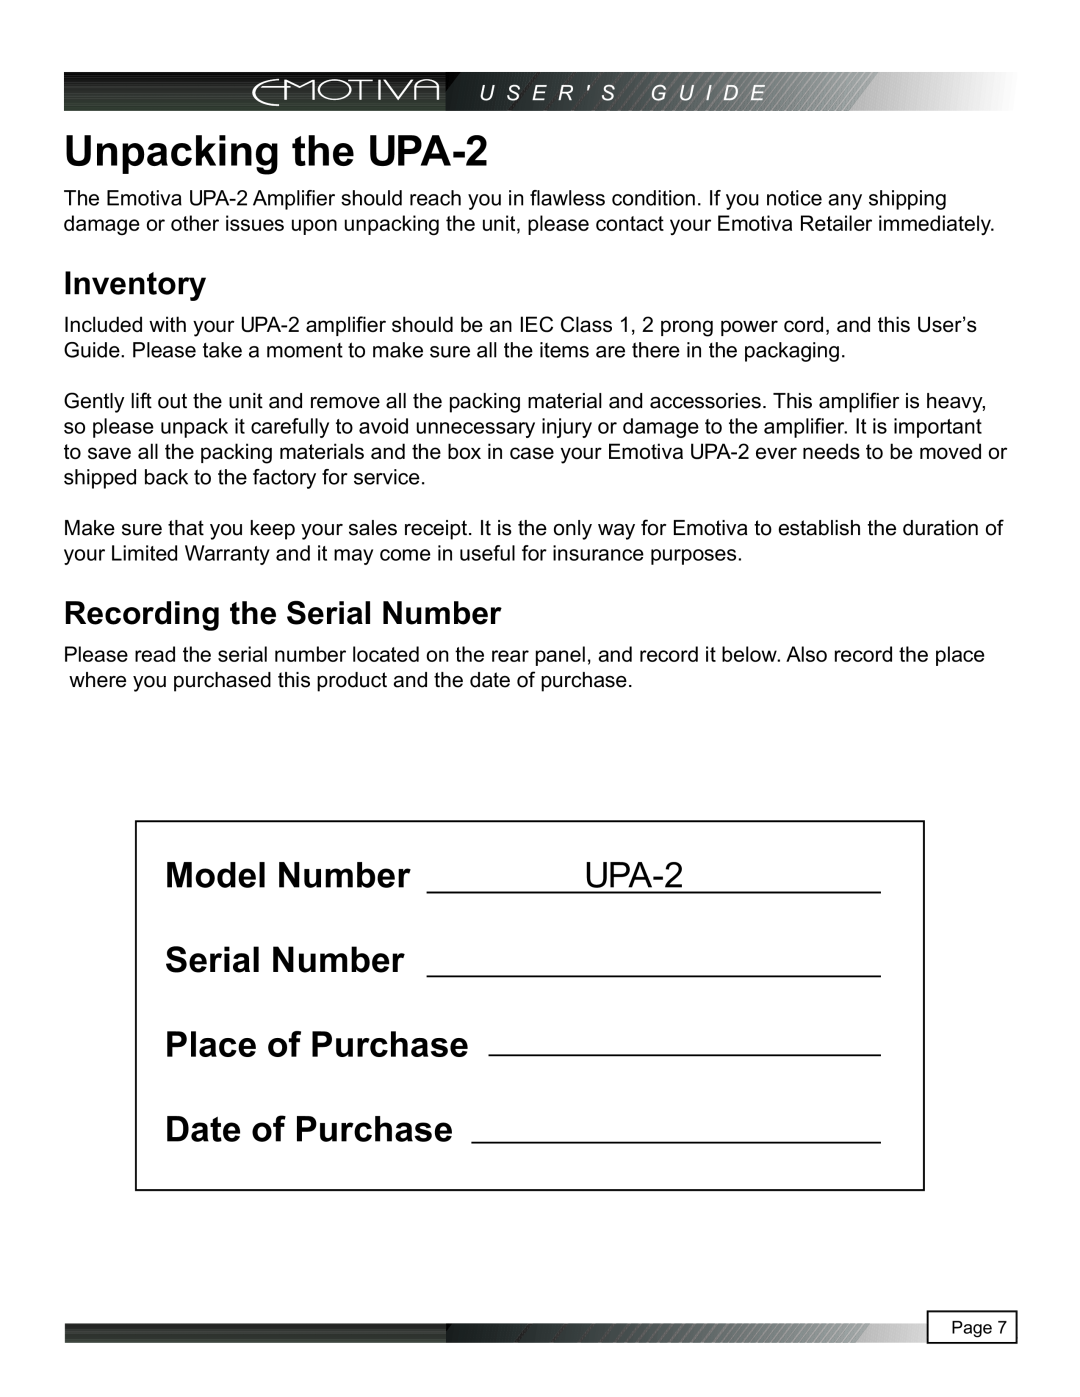 Emotiva manual Unpacking the UPA-2, Inventory, Recording the Serial Number, Model Number 